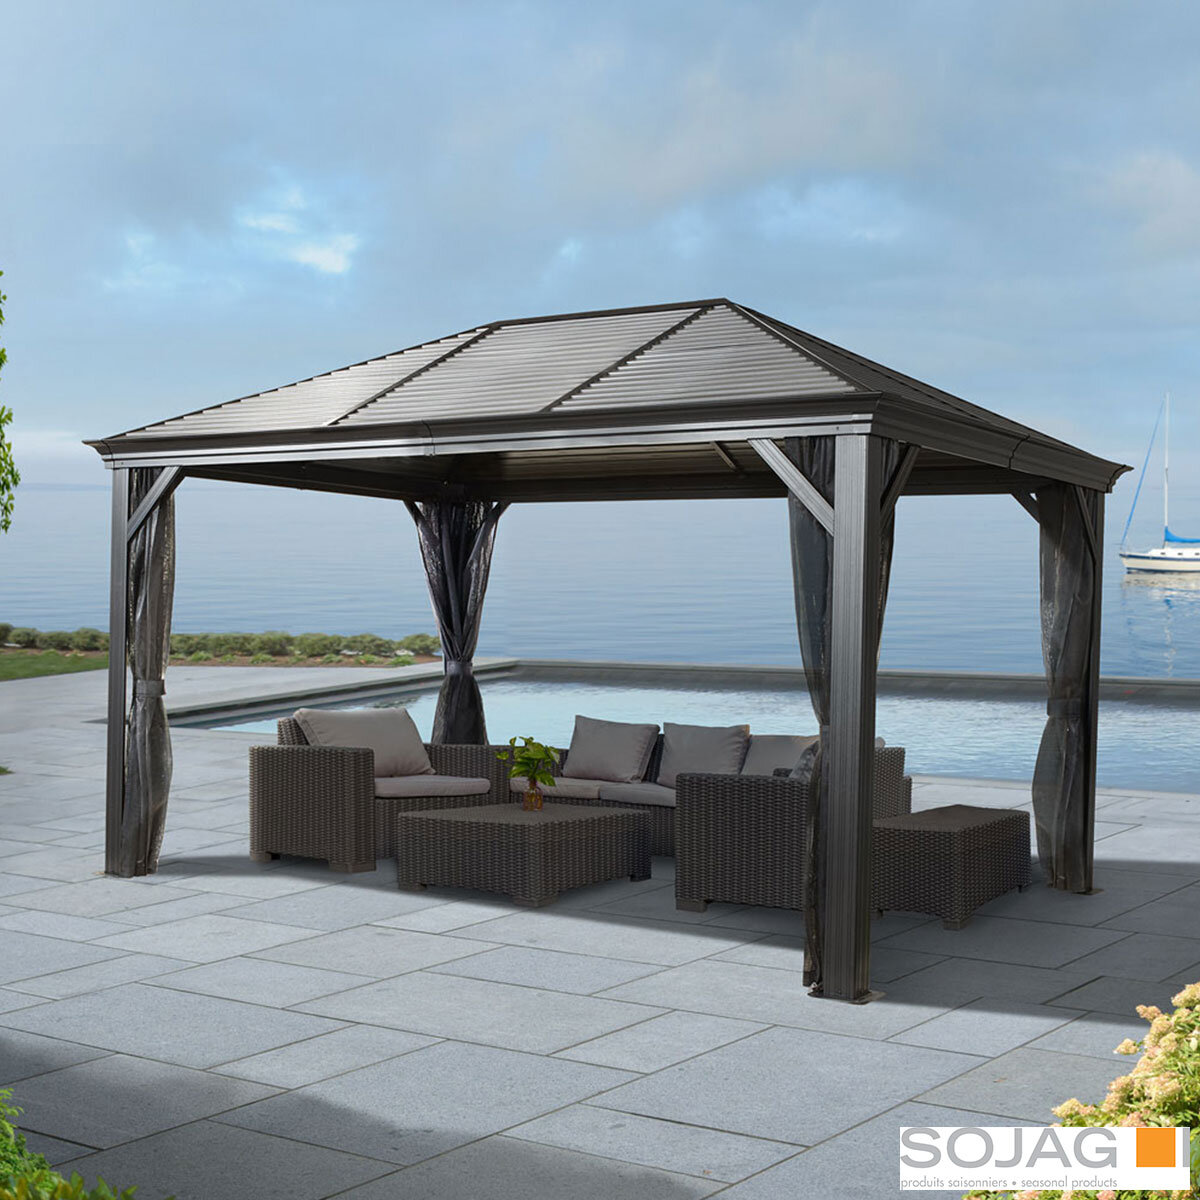 Sojag Mykonos 12ft x 16ft (3.53 x 4.74m) Aluminium Frame Sun Shelter with Galvanised Steel Roof + Insect Netting